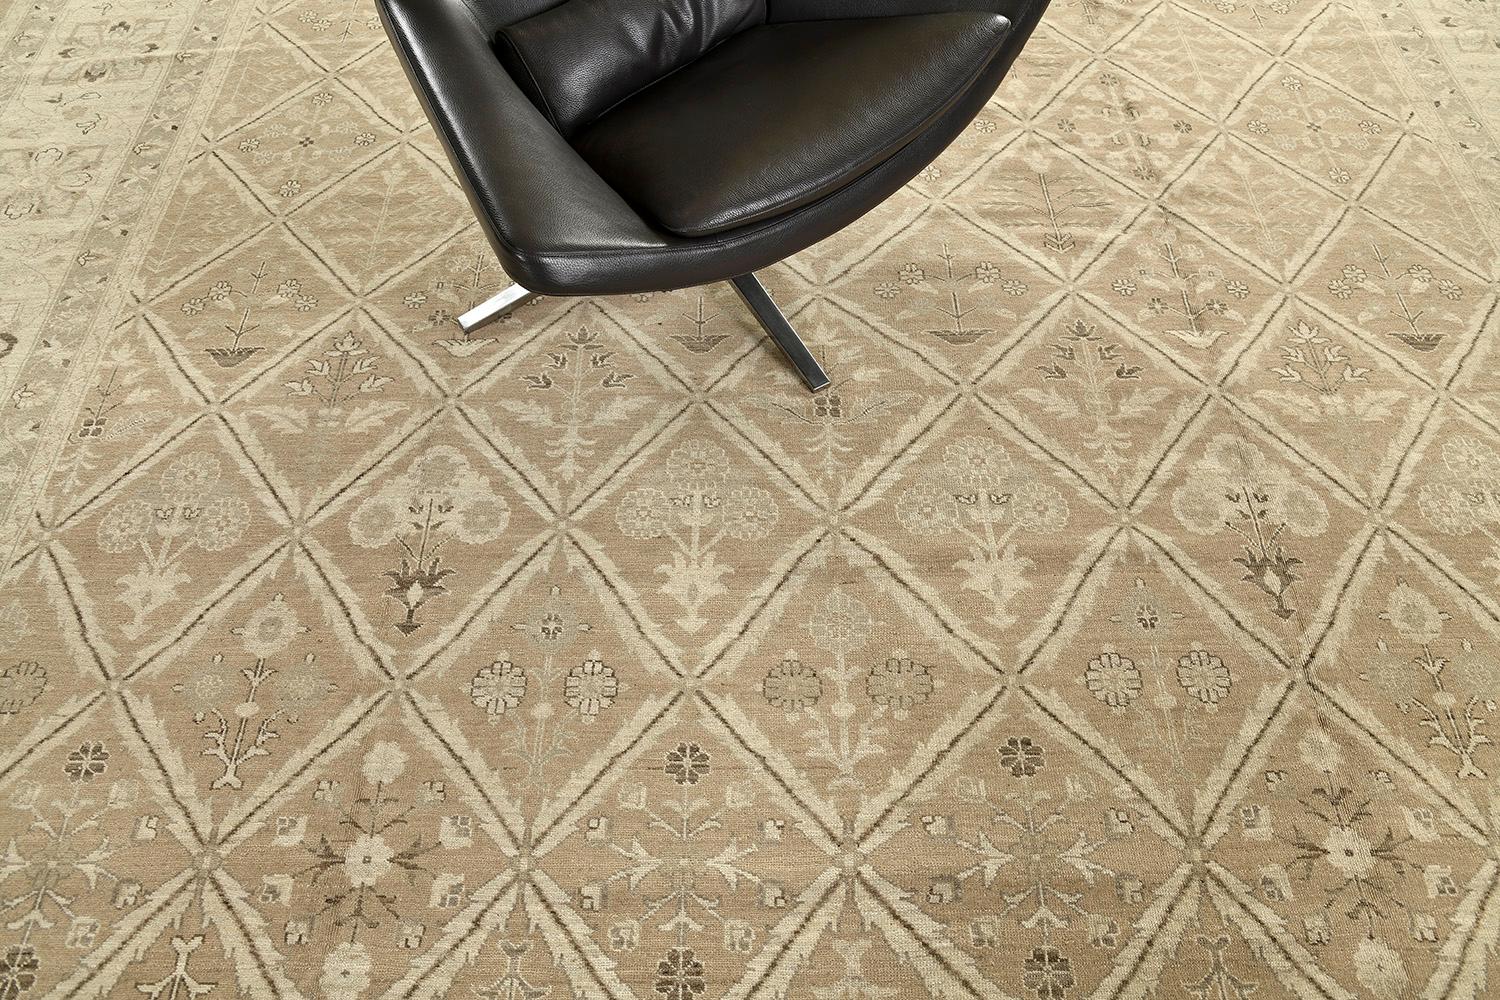 Highly stylish yet attractively casual, this revival of Vintage Style Mahal Panel Design rug features an all-over raised pattern composed of alternating floral motifs in a panel design of botanical elements that clearly reminds every viewer of an